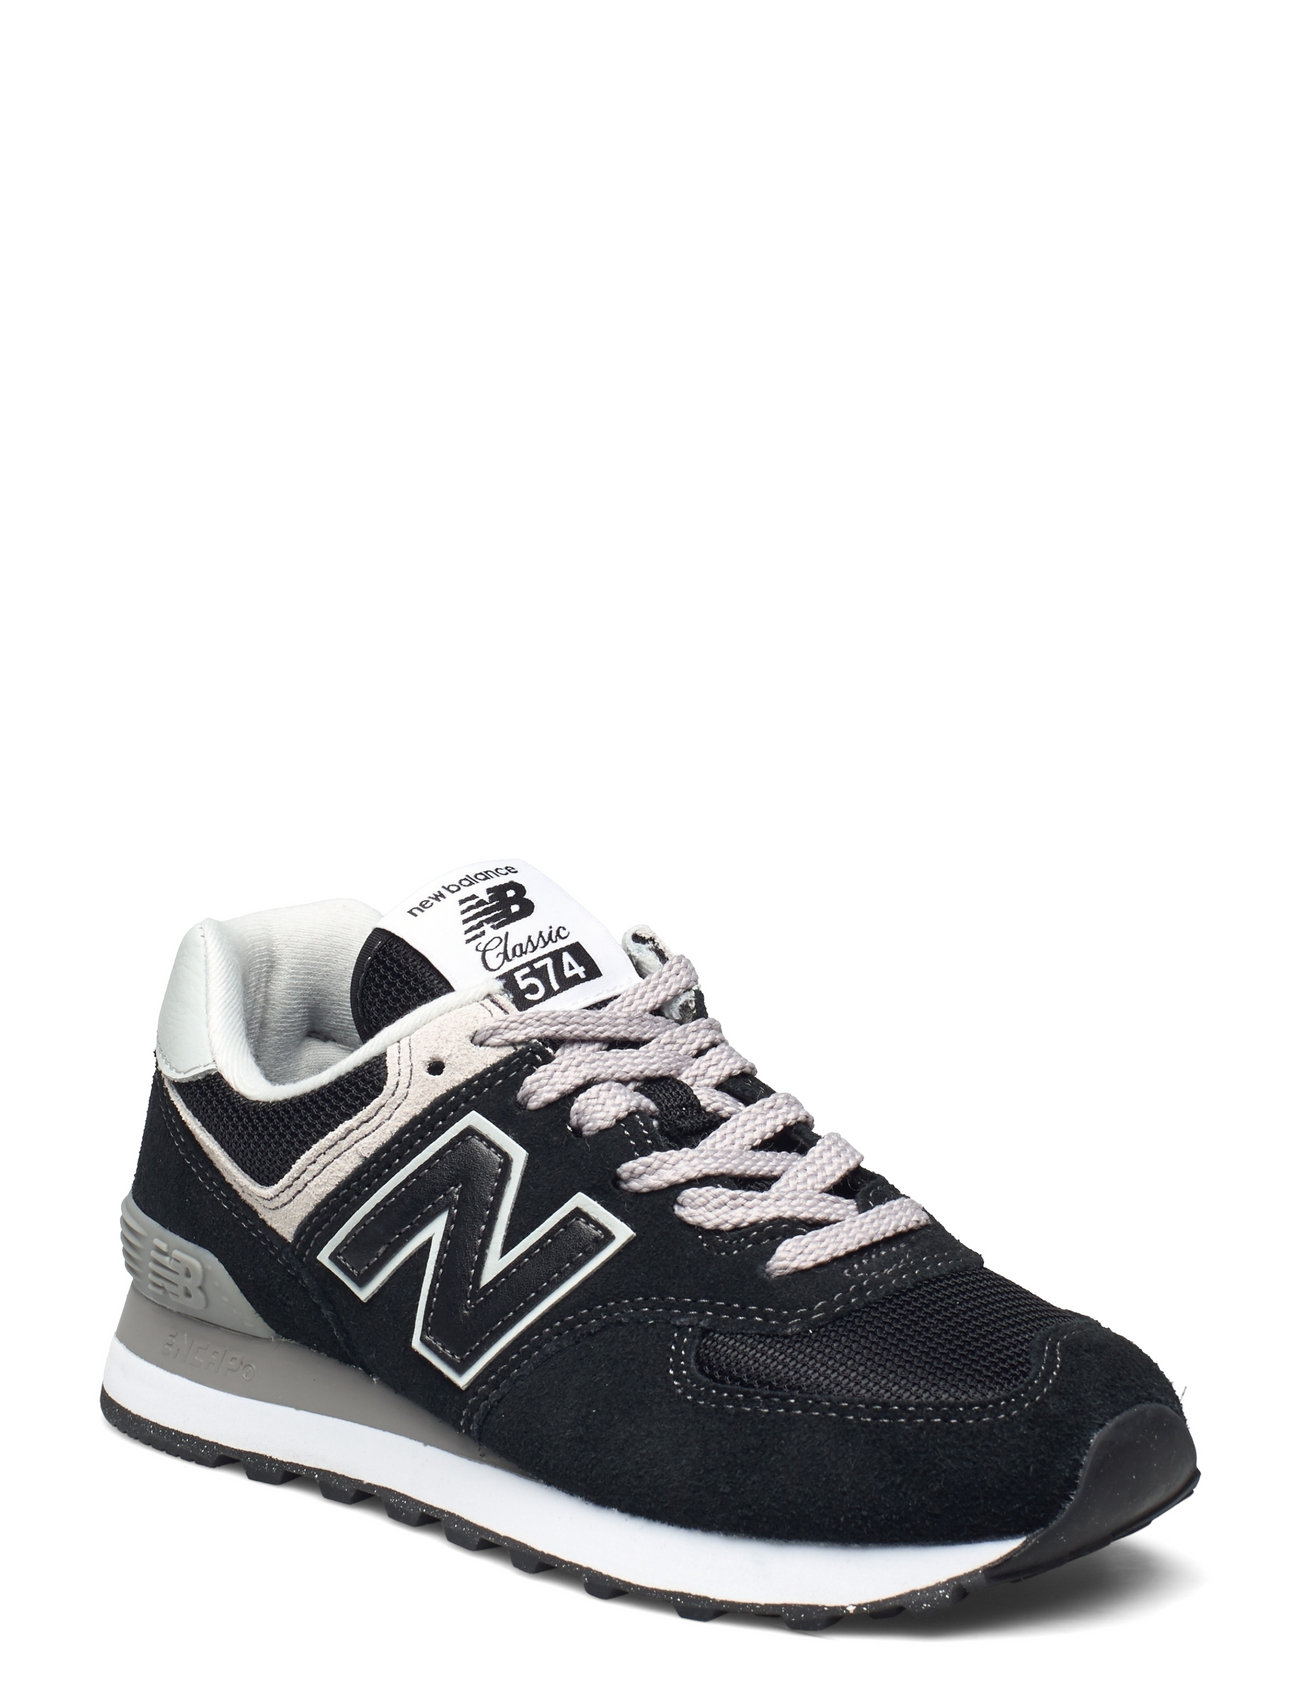 New Balance 574 Sport Sneakers Low-top Sneakers Black New Balance